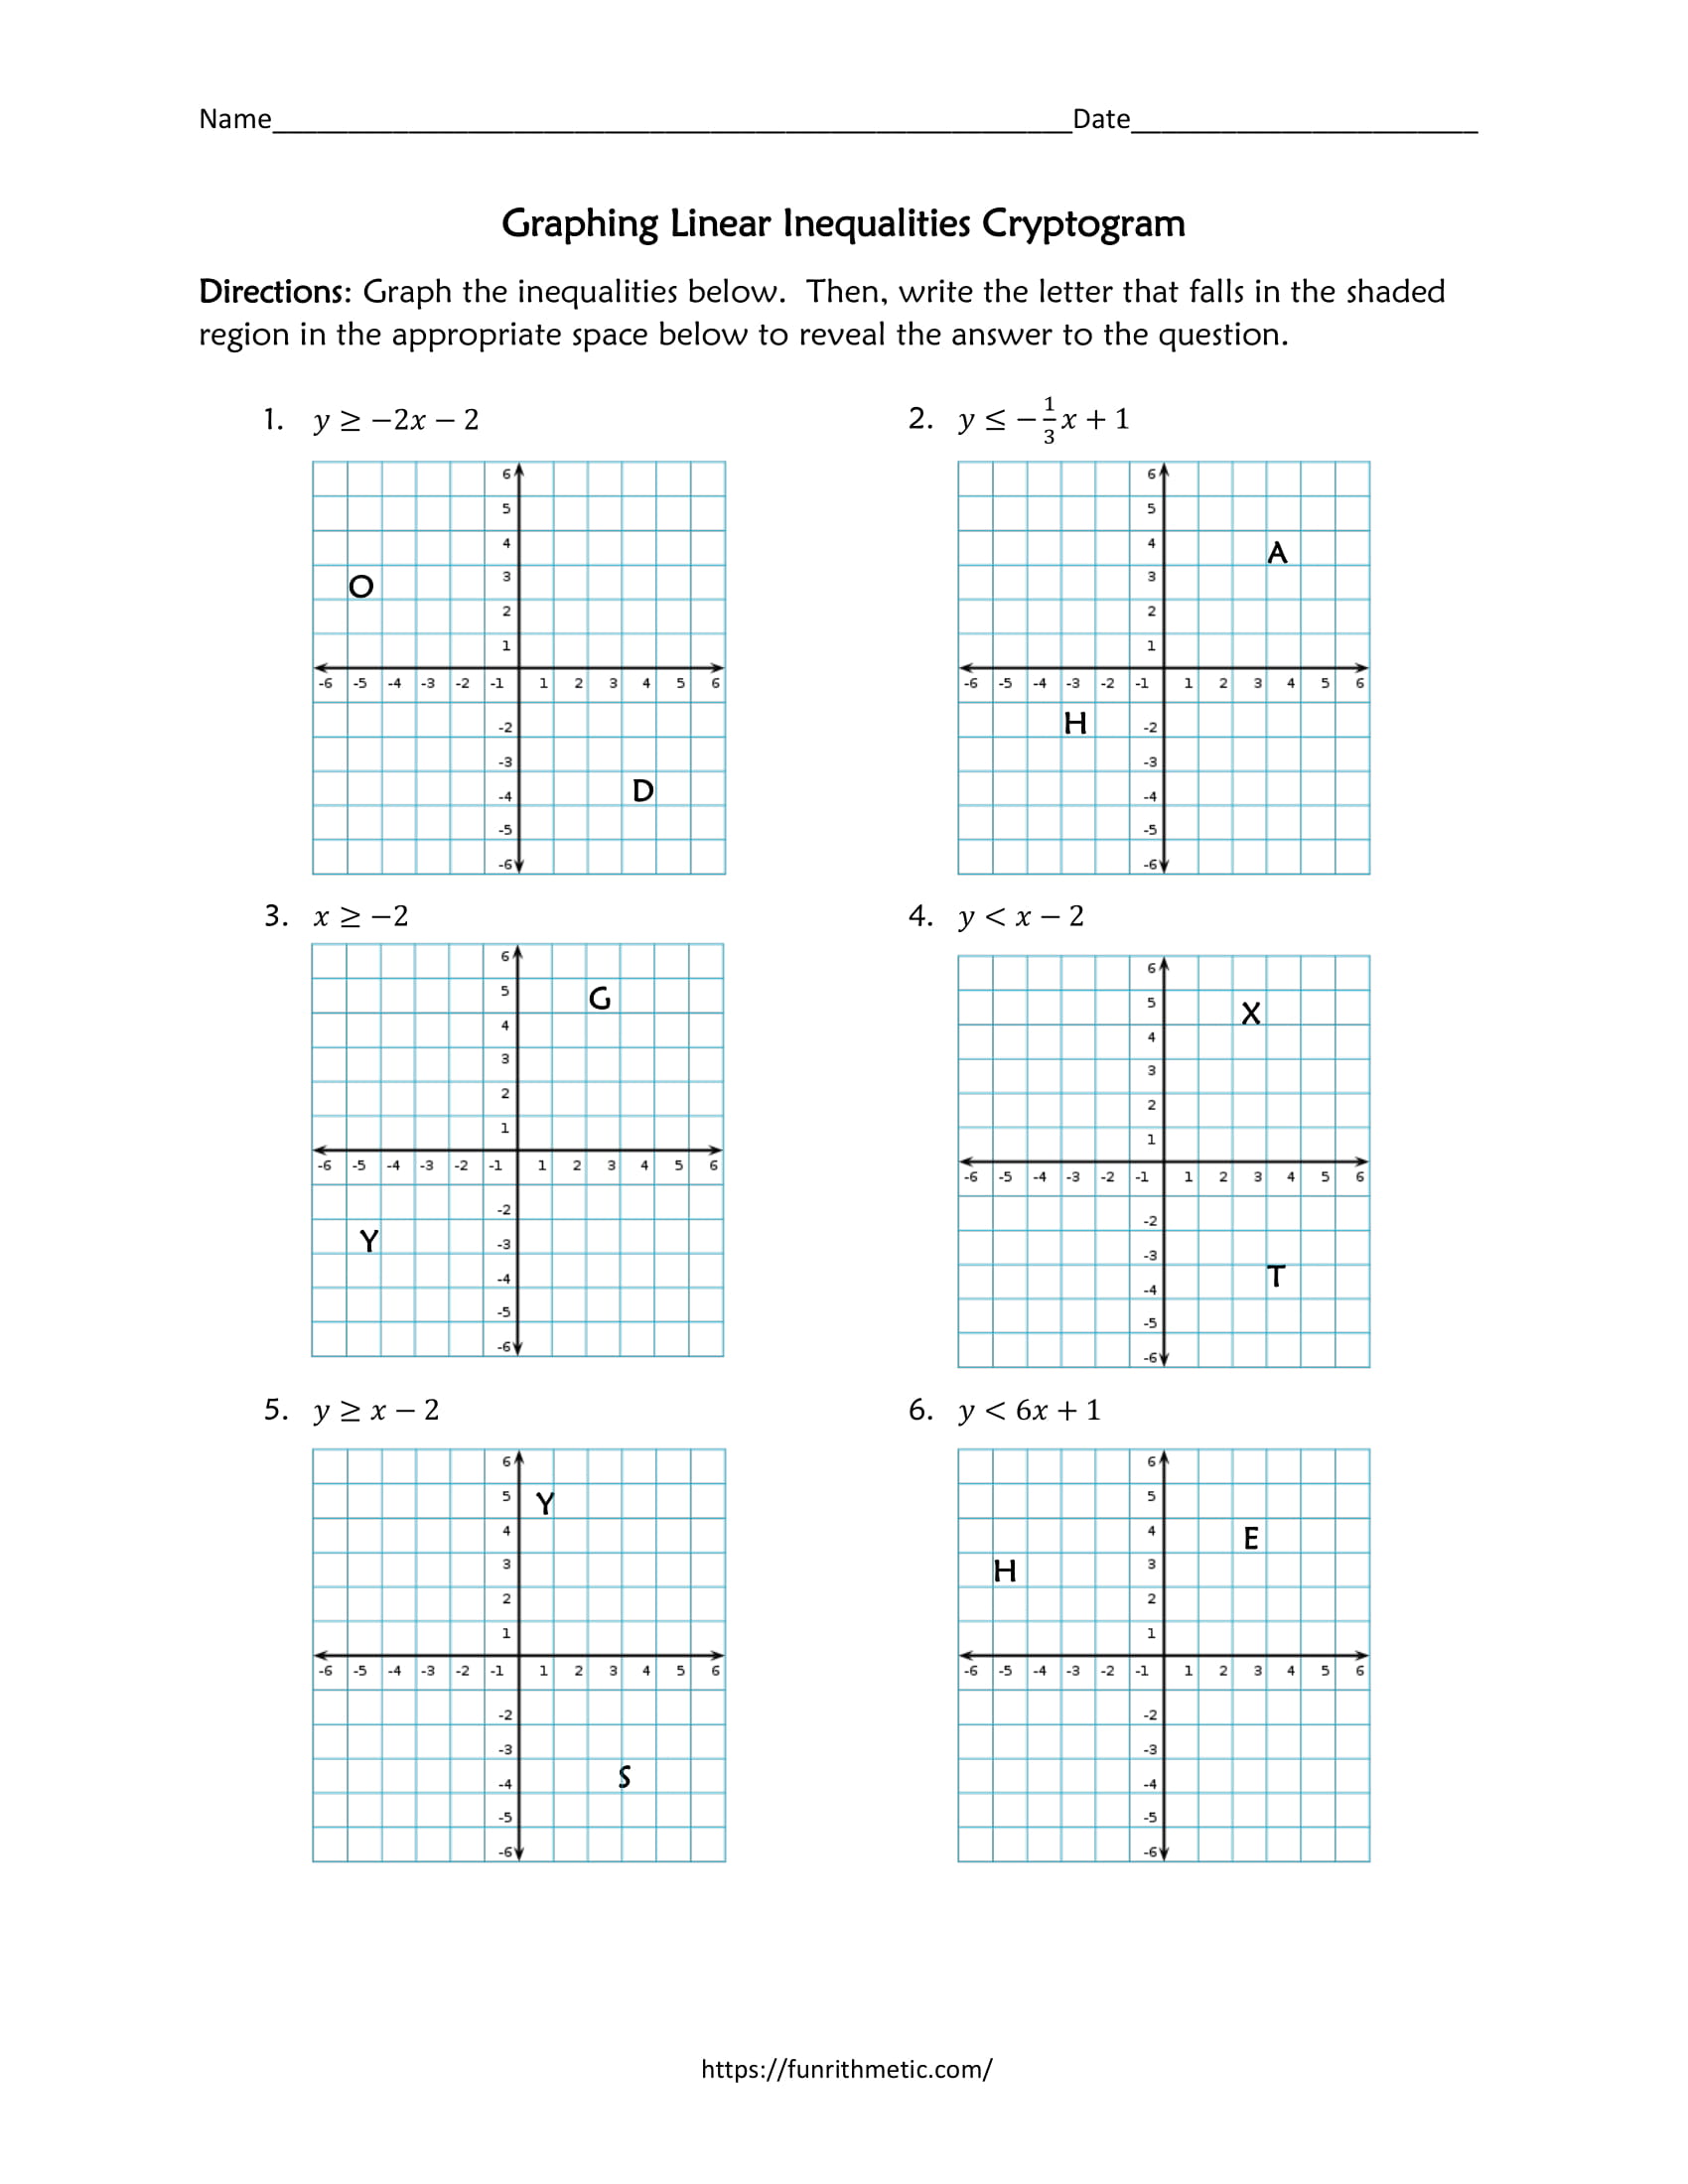 Graphing Linear Inequalities Cryptogram Worksheet Within Graphing Linear Equations Practice Worksheet